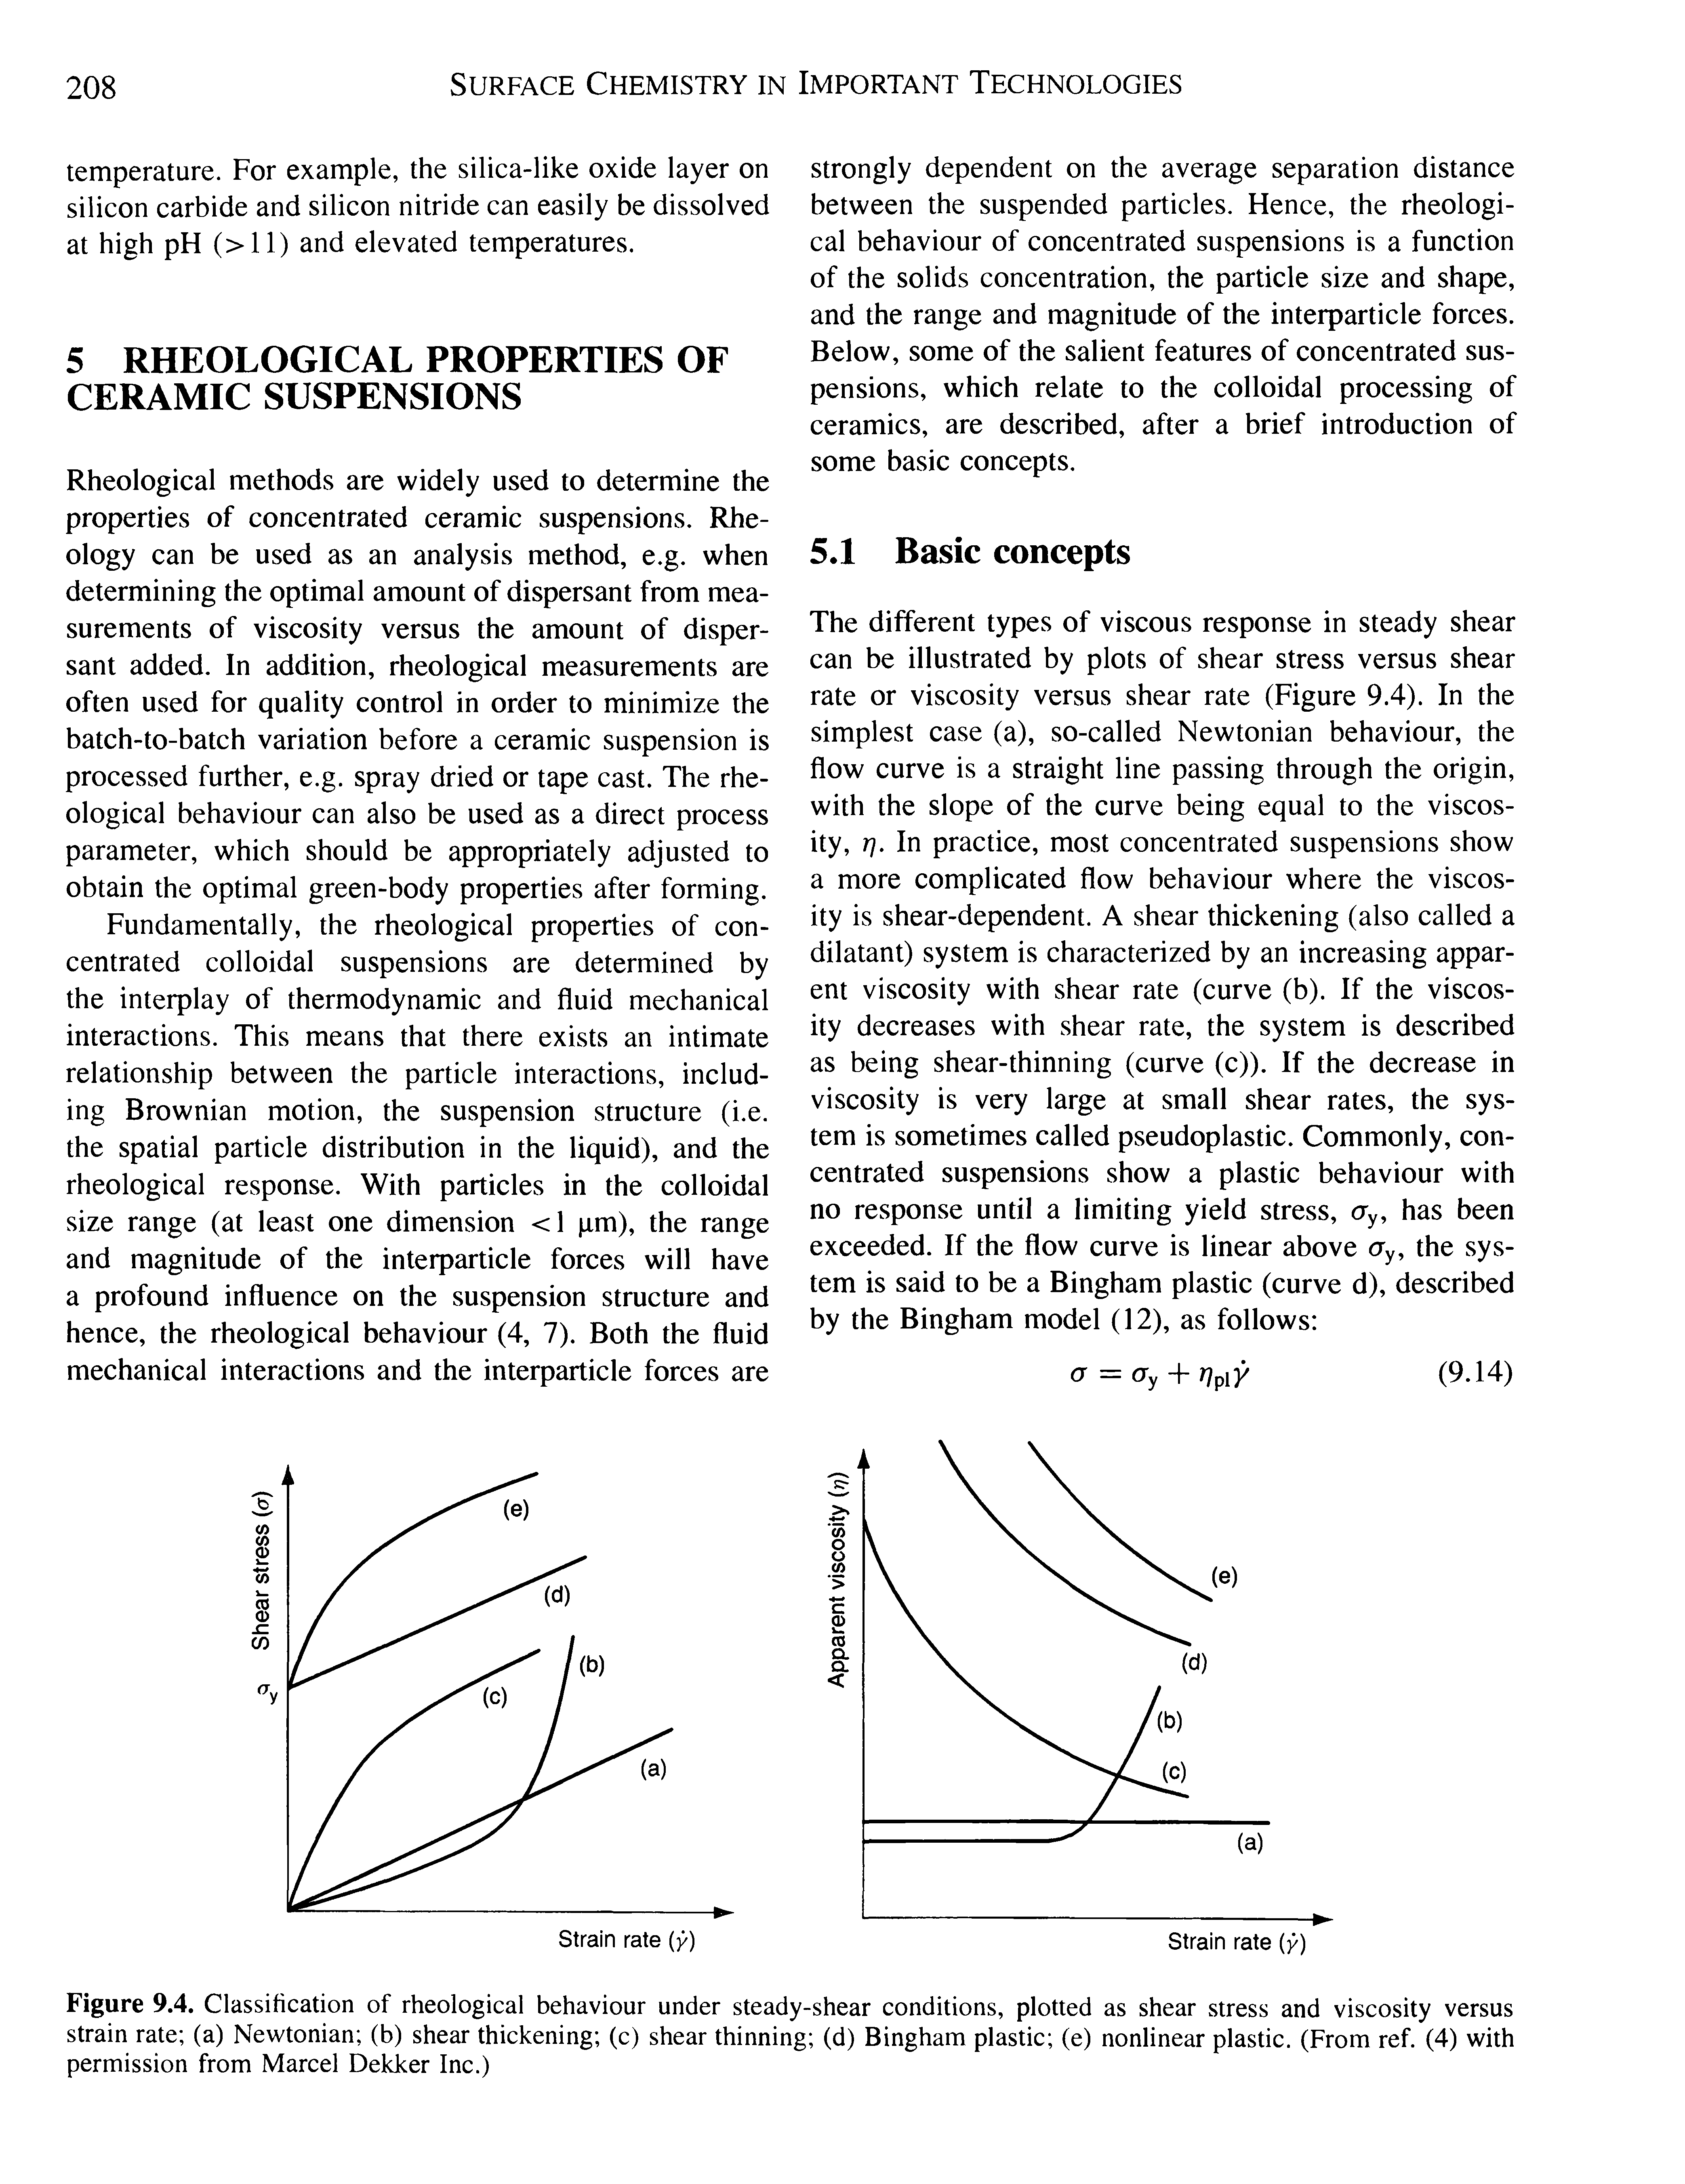 Figure 9.4. Classification of rheological behaviour under steady-shear conditions, plotted as shear stress and viscosity versus strain rate (a) Newtonian (b) shear thickening (c) shear thinning (d) Bingham plastic (e) nonlinear plastic. (From ref. (4) with permission from Marcel Dekker Inc.)...